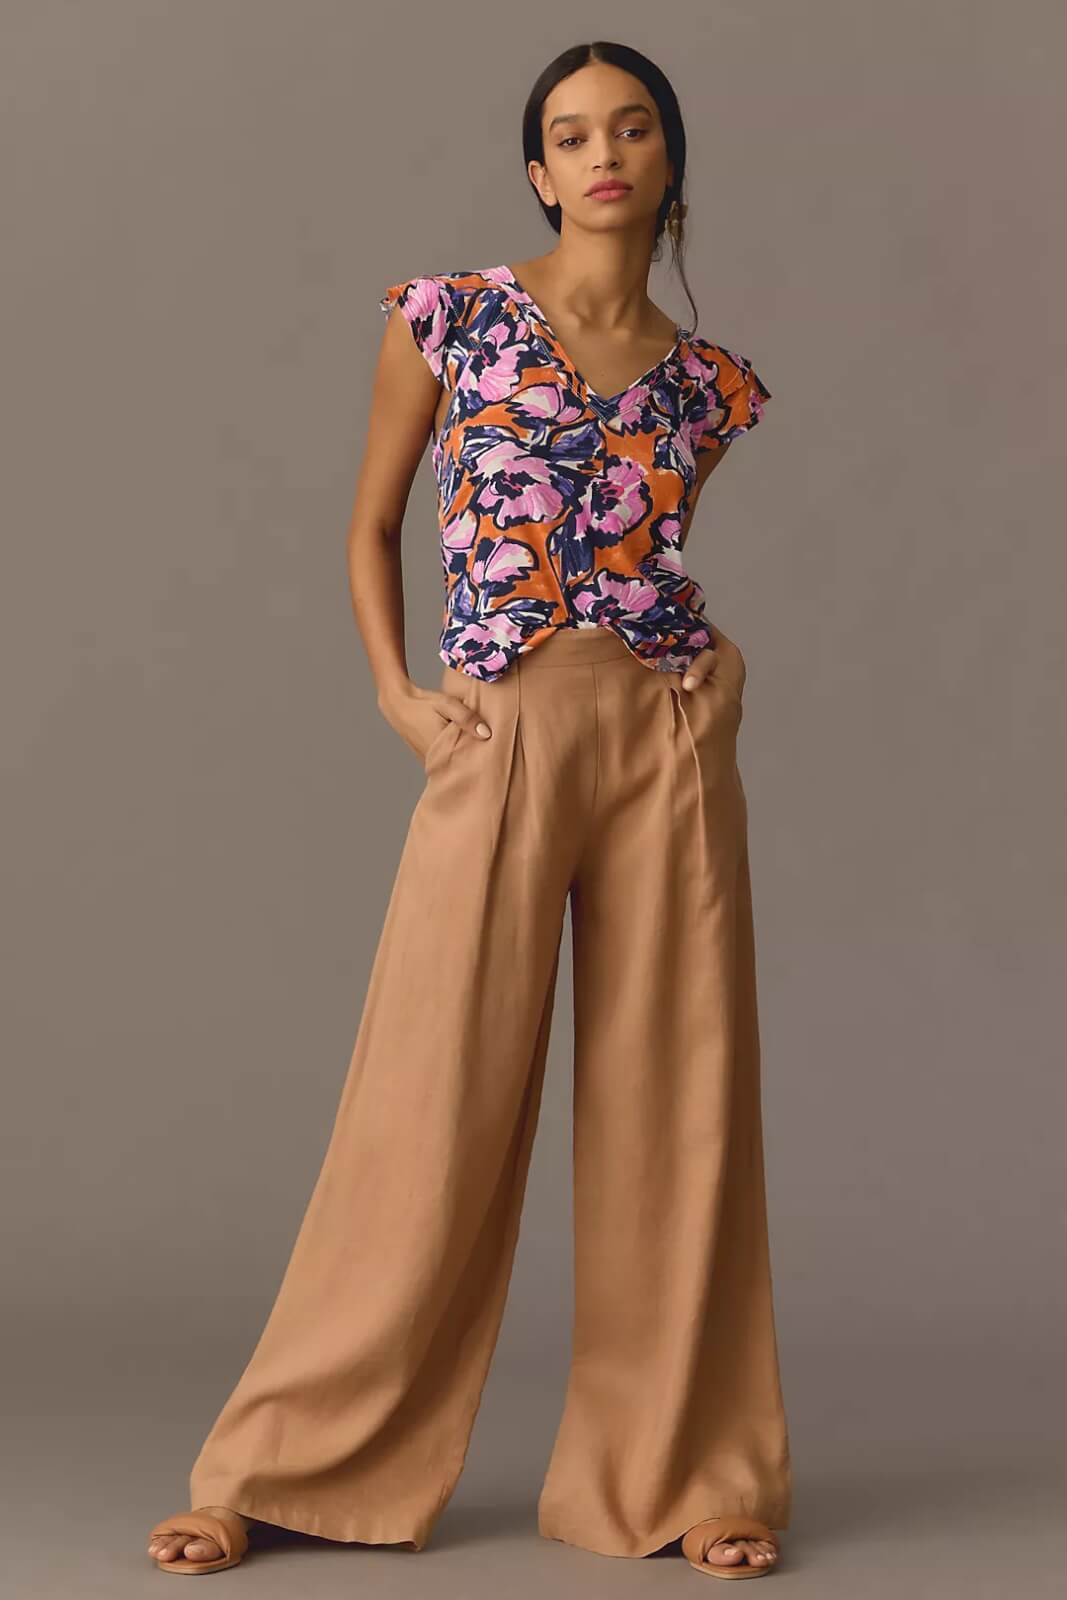 Model in orange floral blouse and wide-leg pants